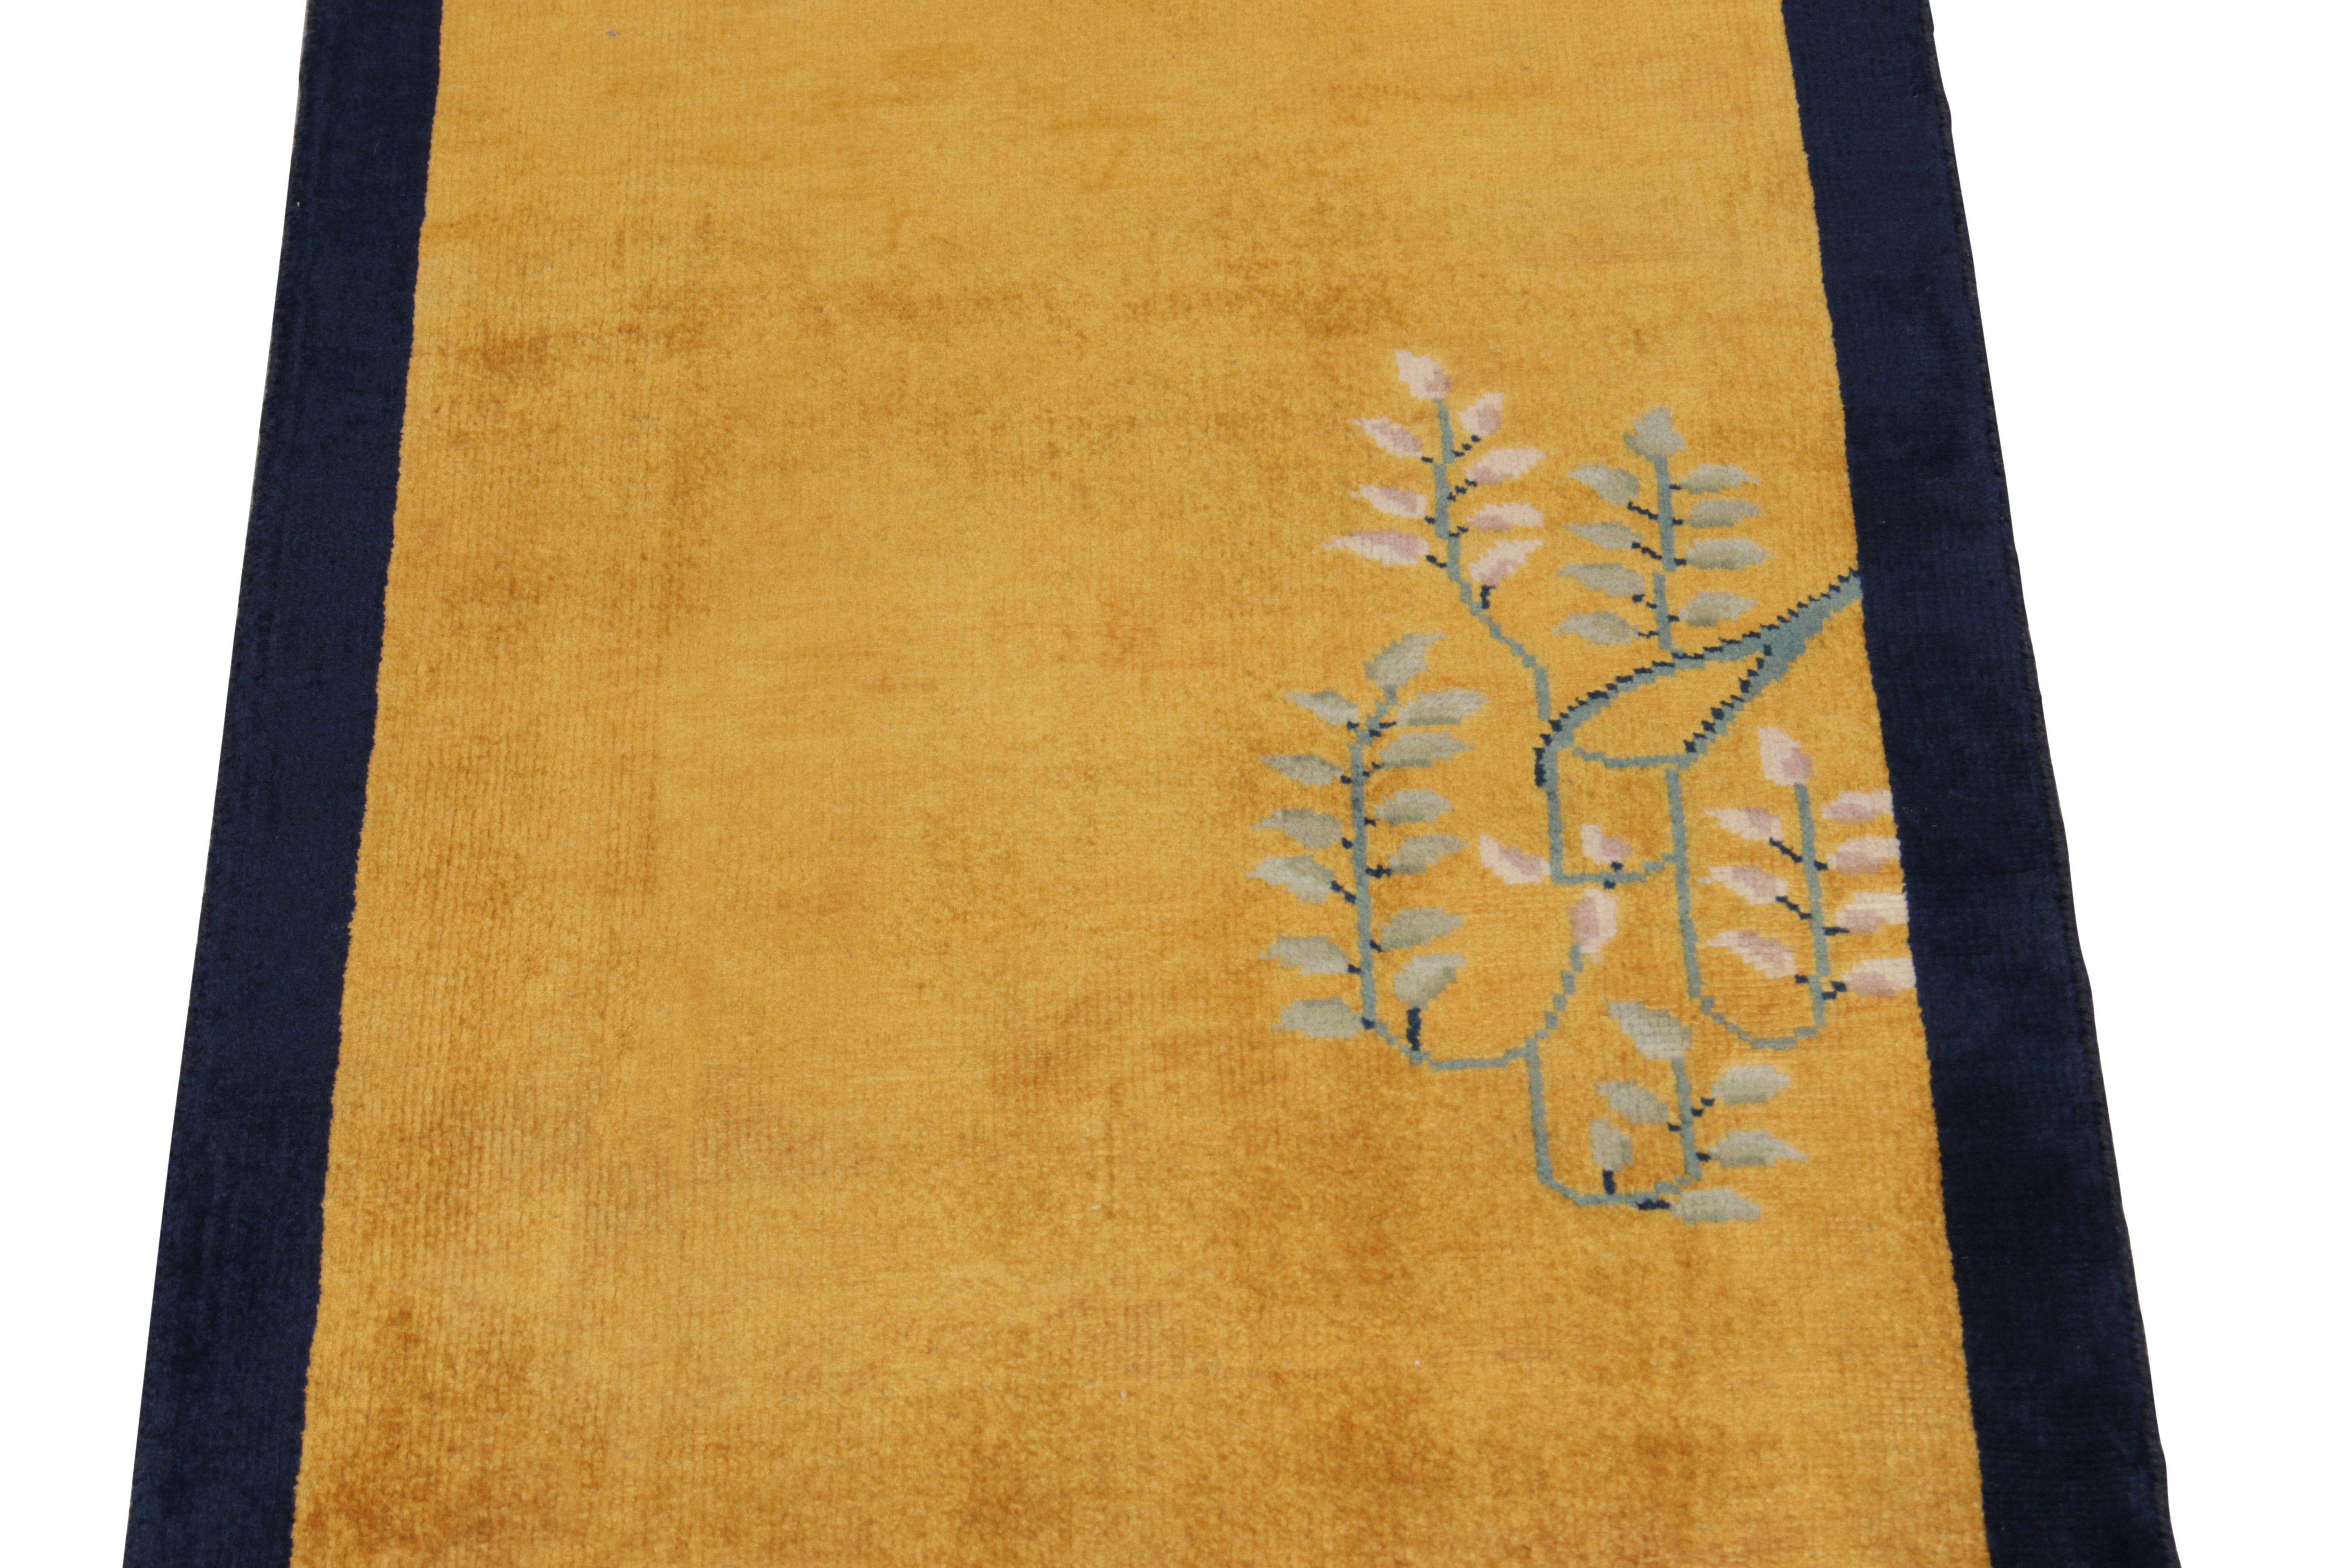 Indian Vintage Chinese Deco Style Rug in Gold, Navy Border, Green Floral Pattern